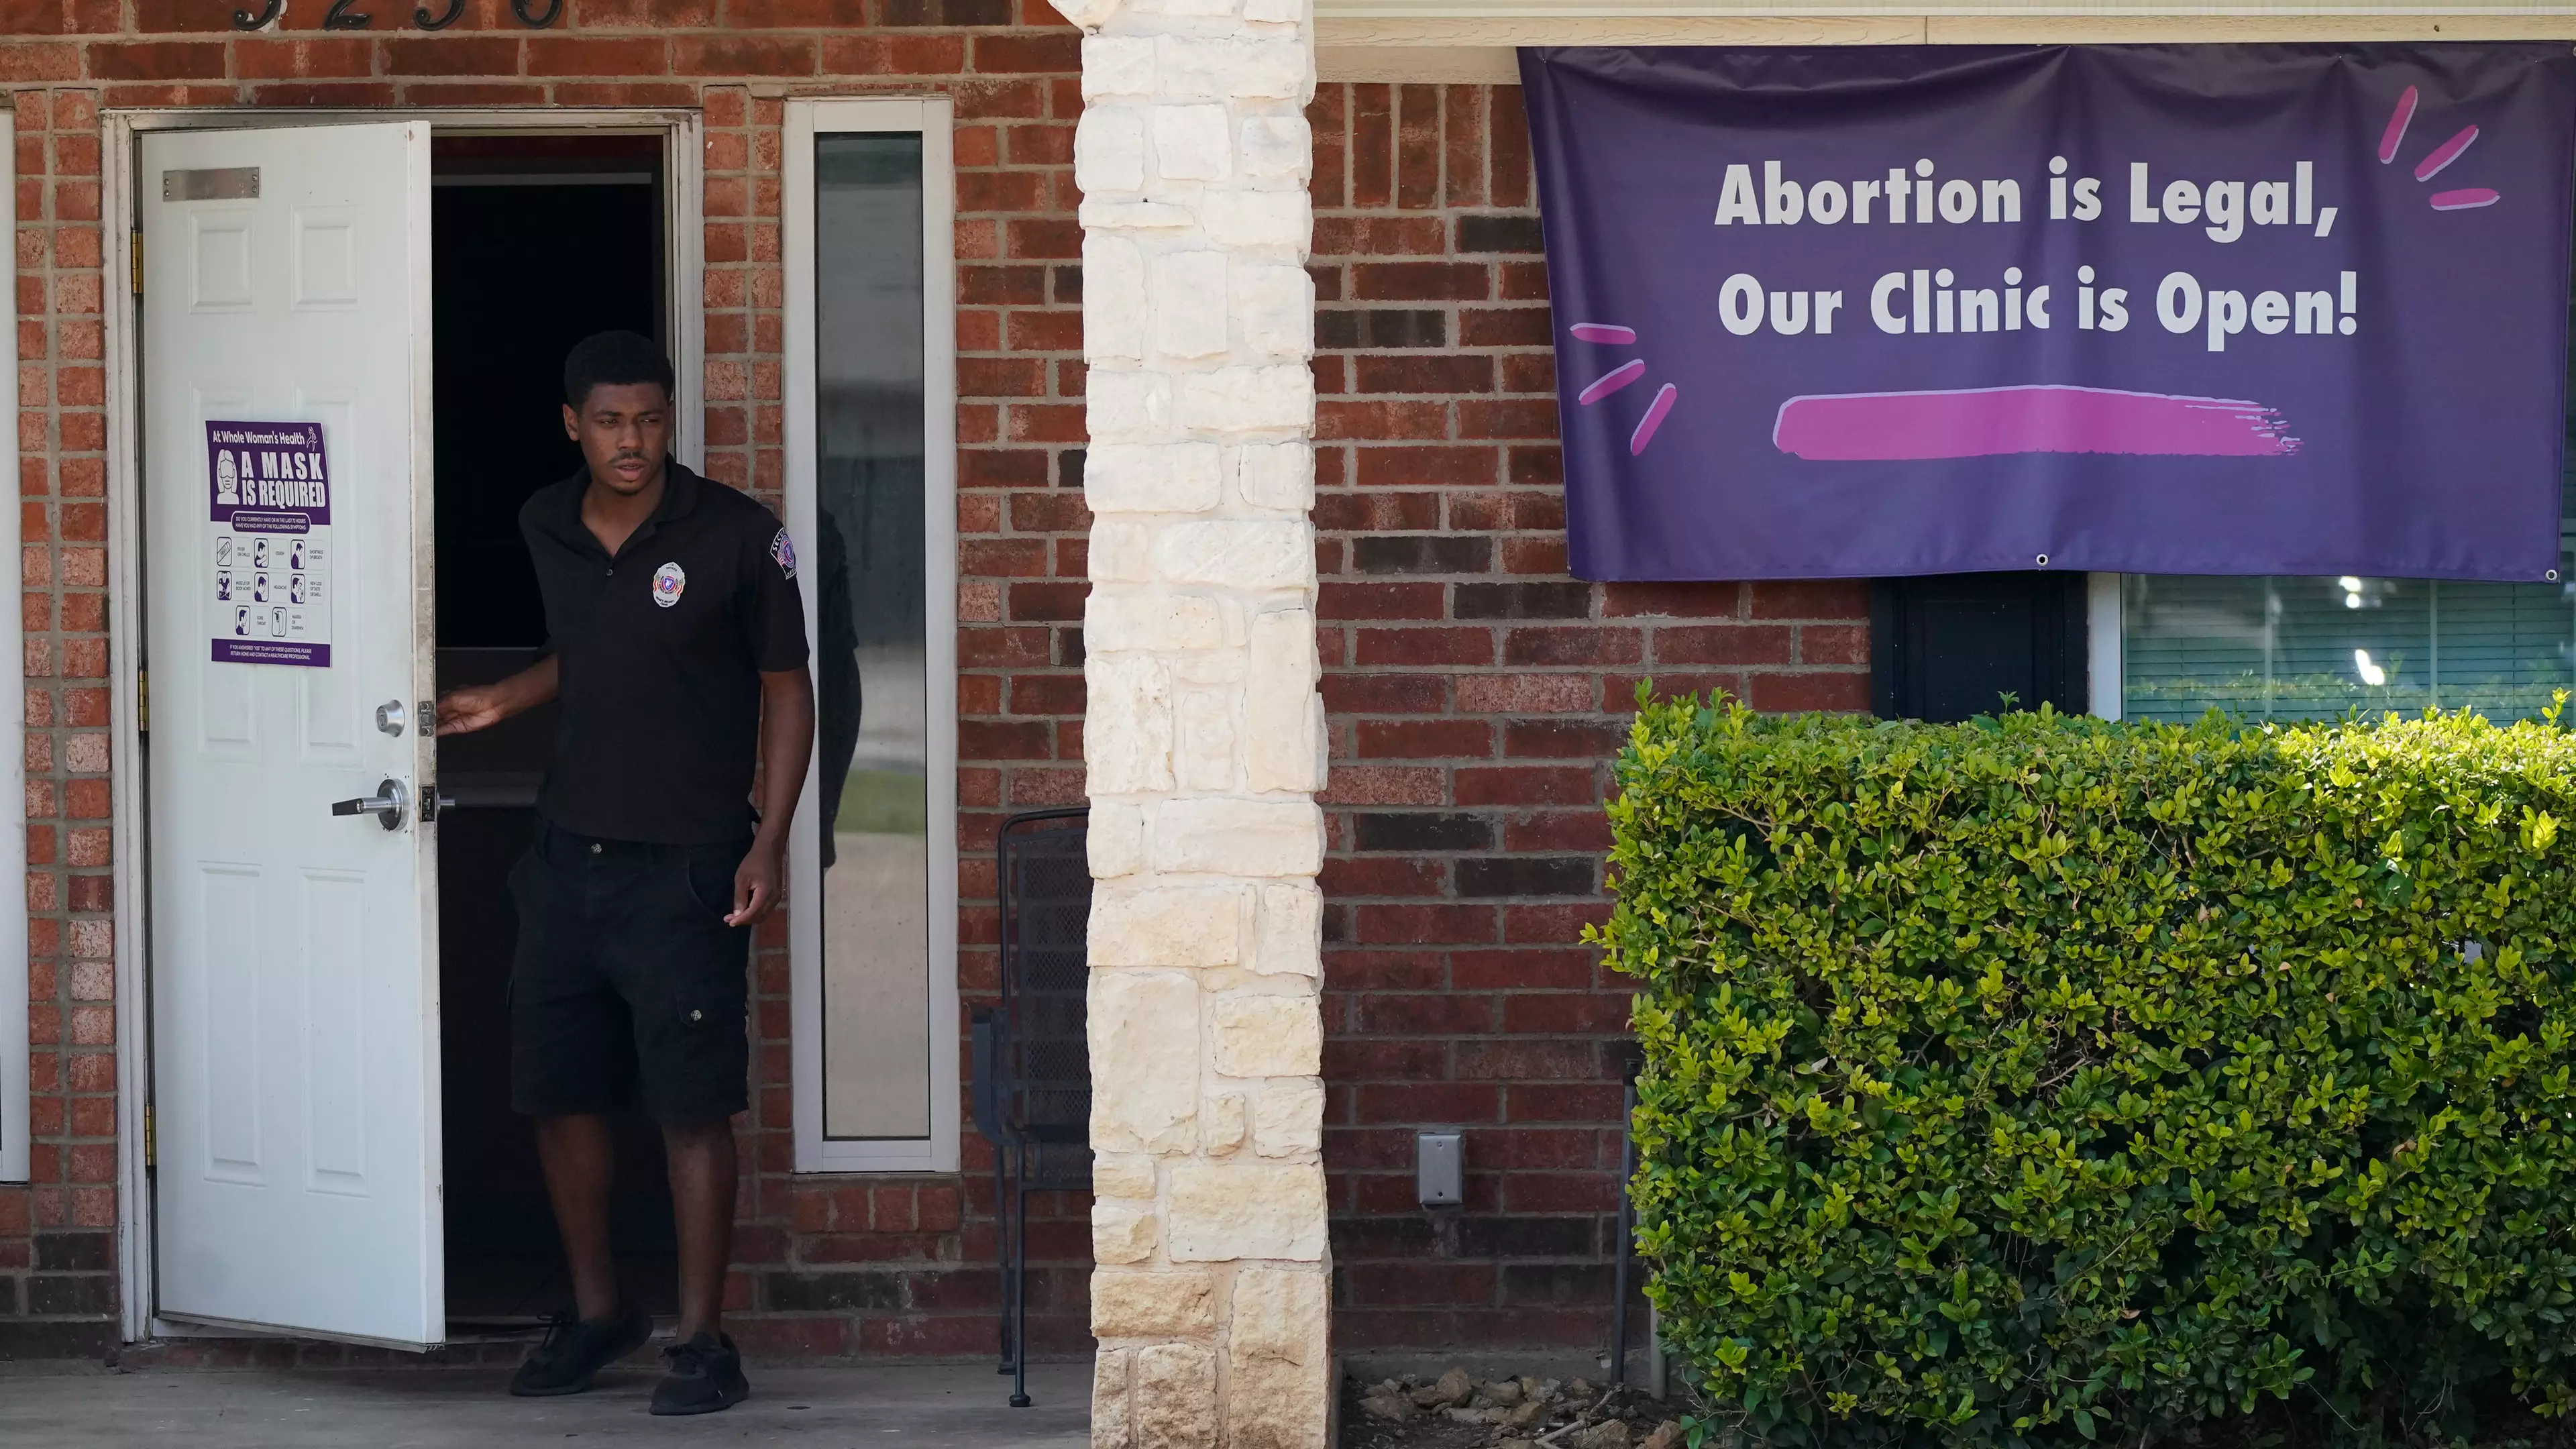 Texas Doctor Performed 67 Abortions In Last Day Before Ban Took Effect